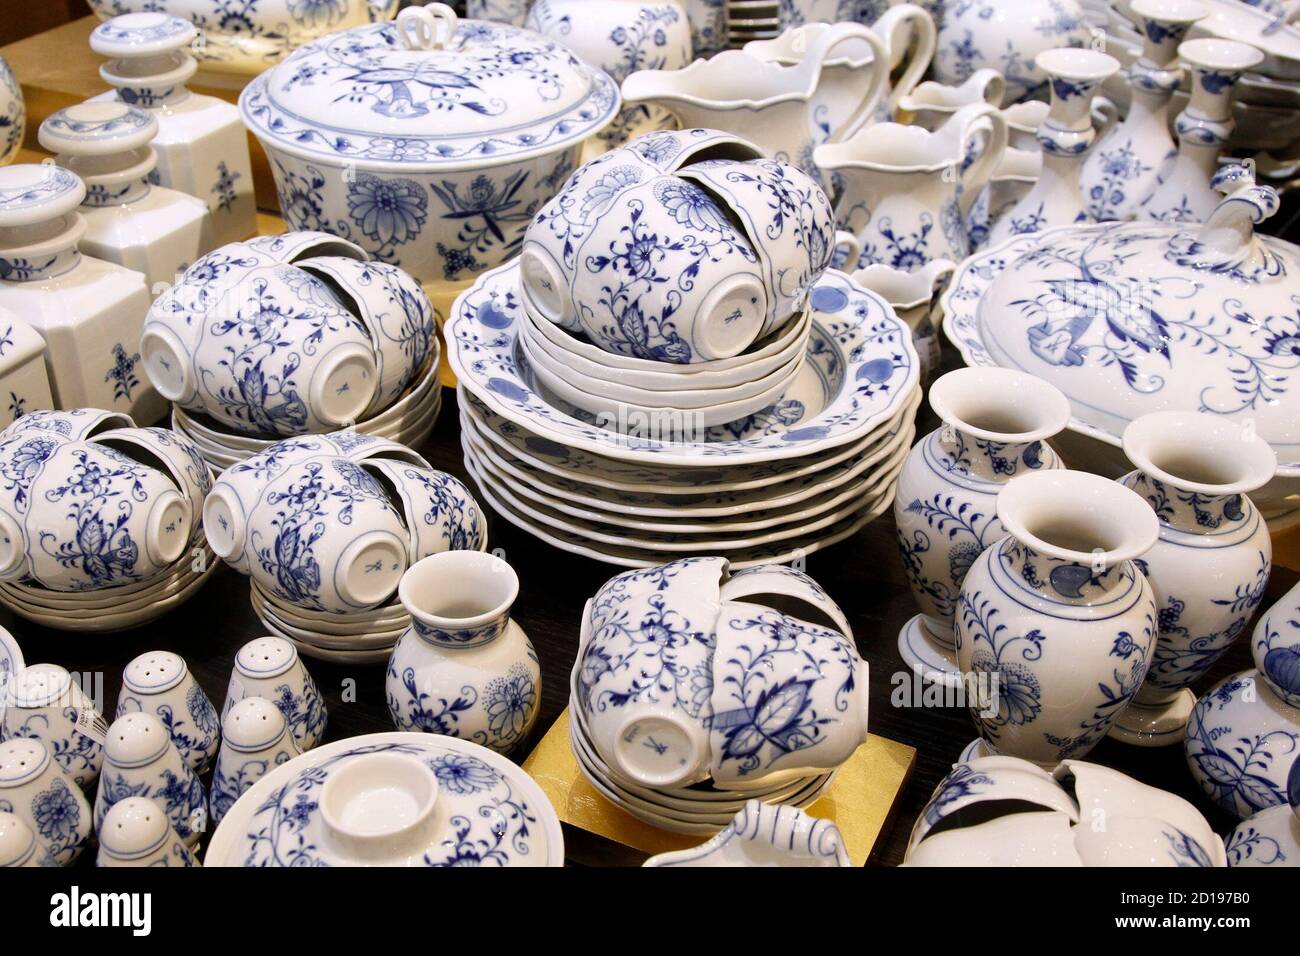 Crockery is displayed during an exhibition of German porcelain manufactures  Meissen in Berlin April 14, 2010. Berlin's famous KaDeWe (Kaufhaus des  Westens, department store of the West) on Wednesday opened an exhibition